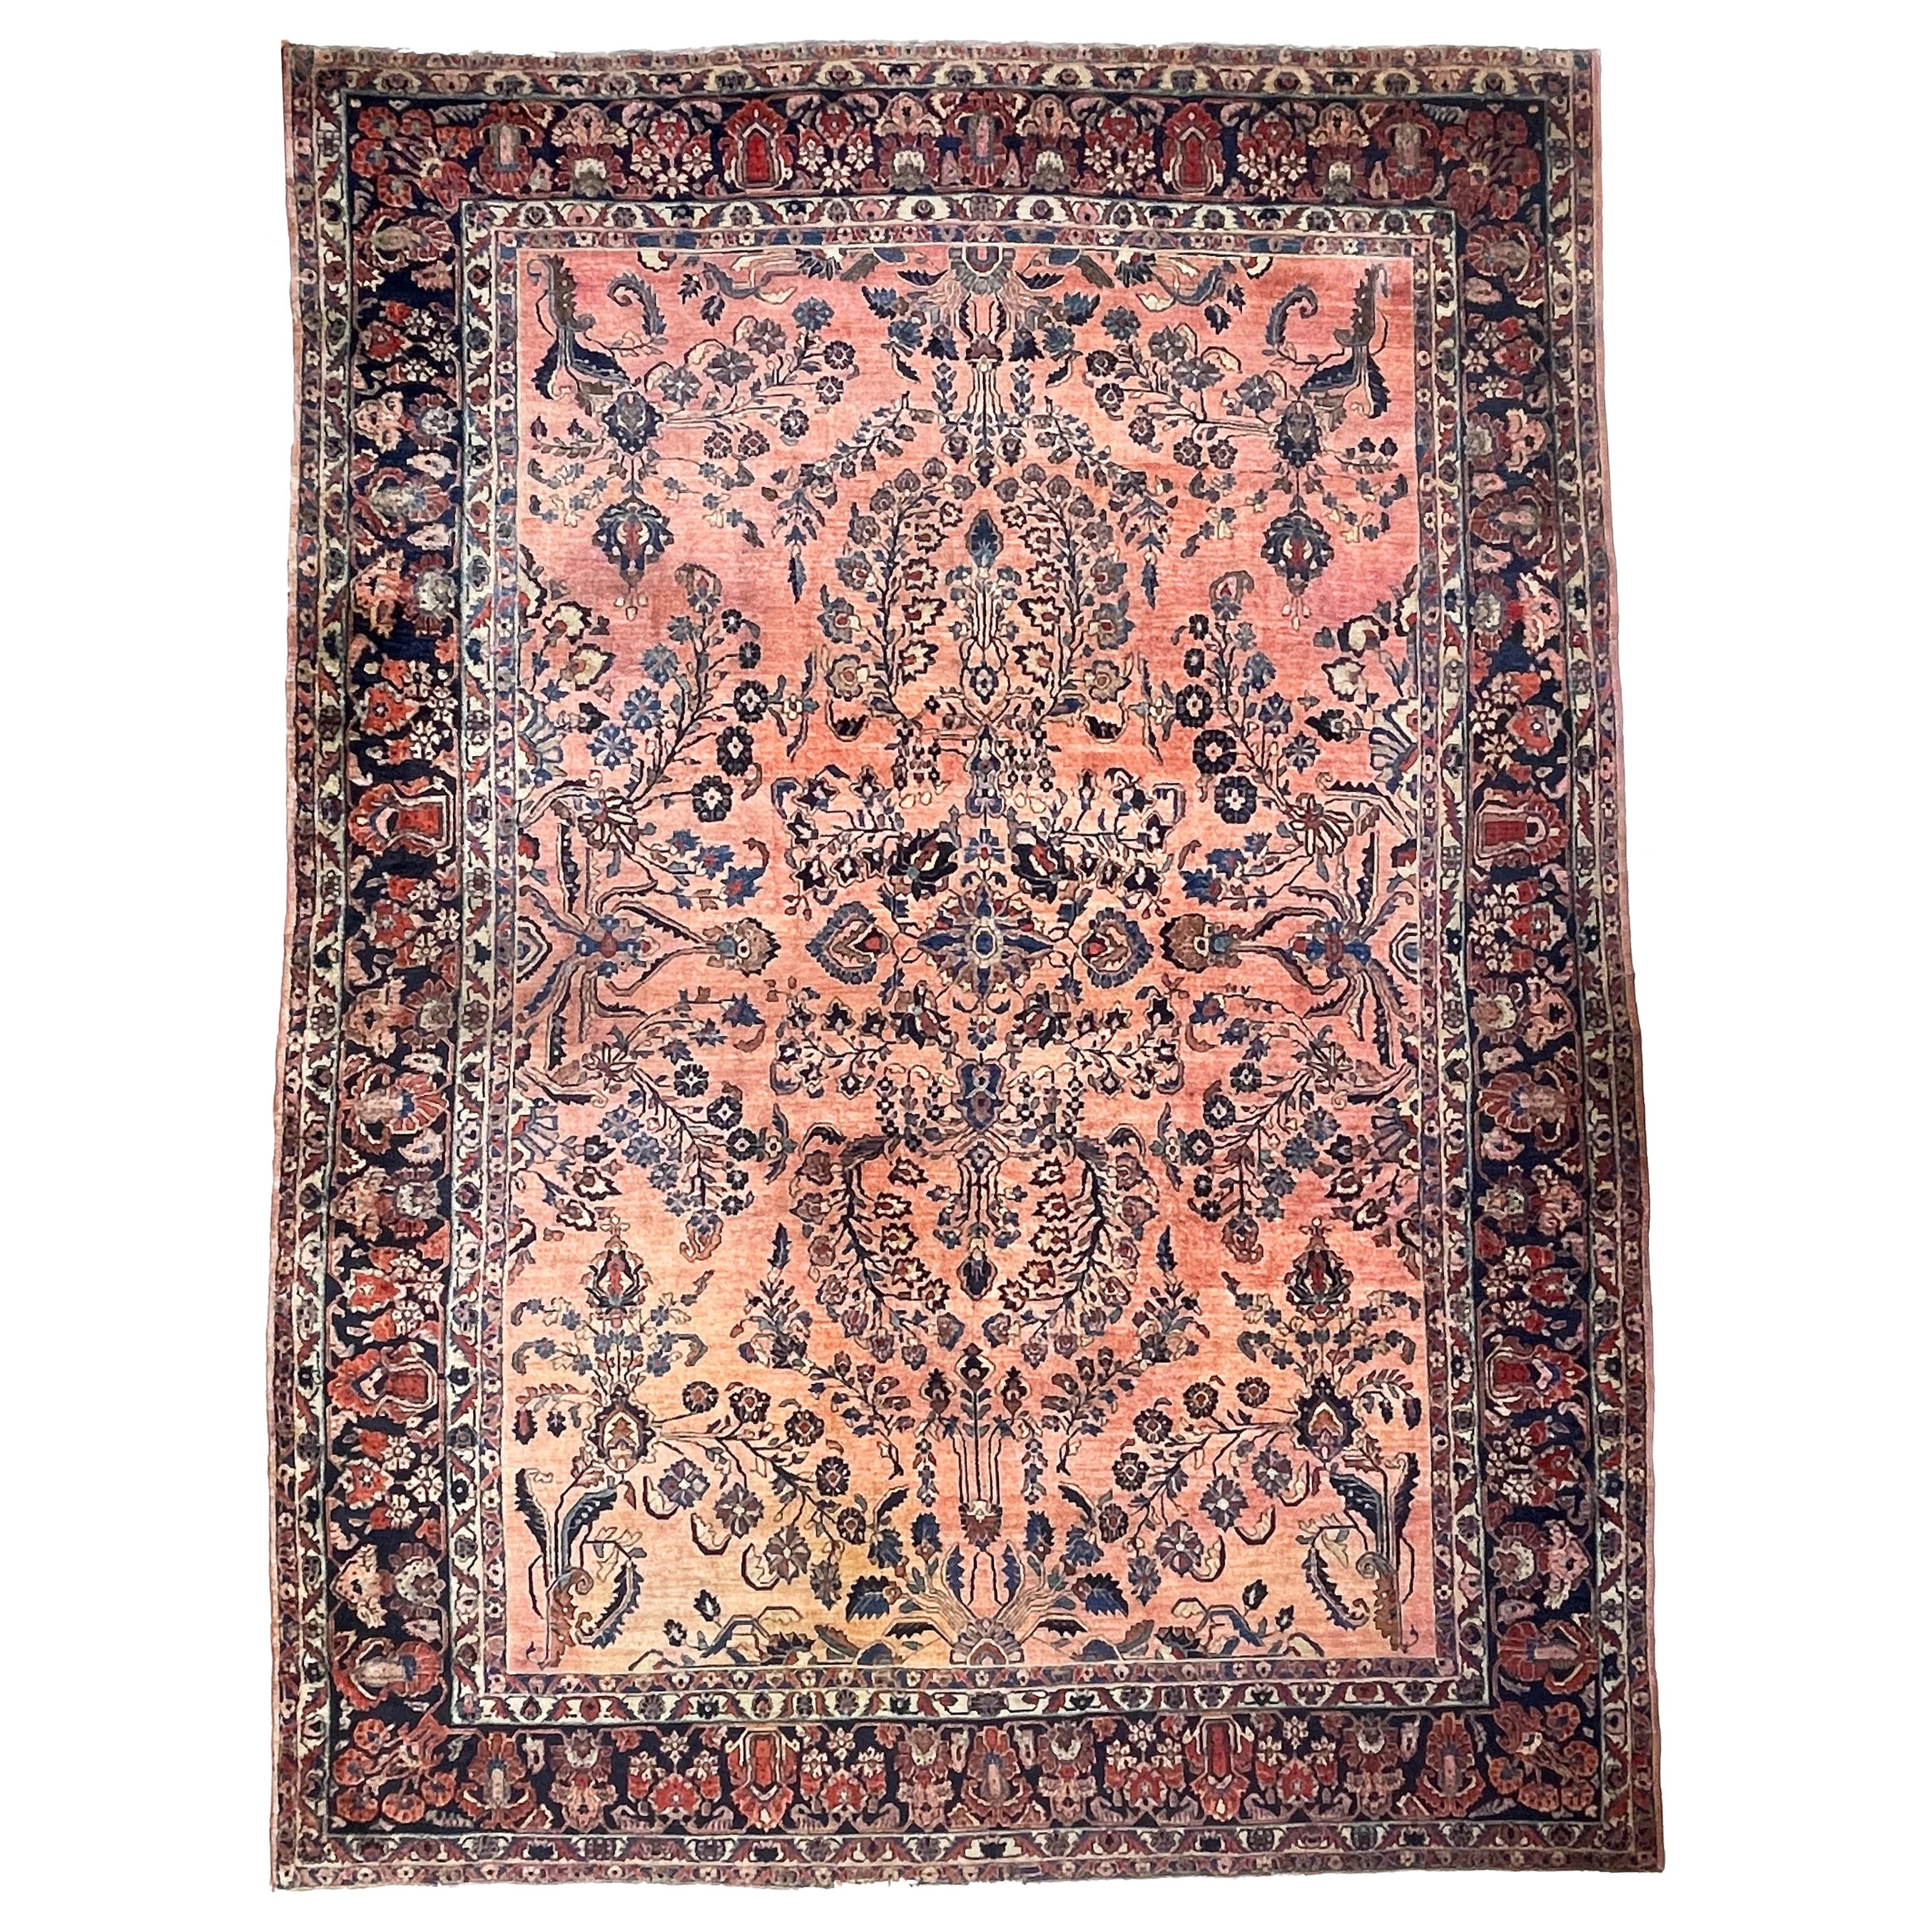 Glowing Antique Botanical Sarouk Rug with Coral, Indigo & Peacock Blue Color For Sale